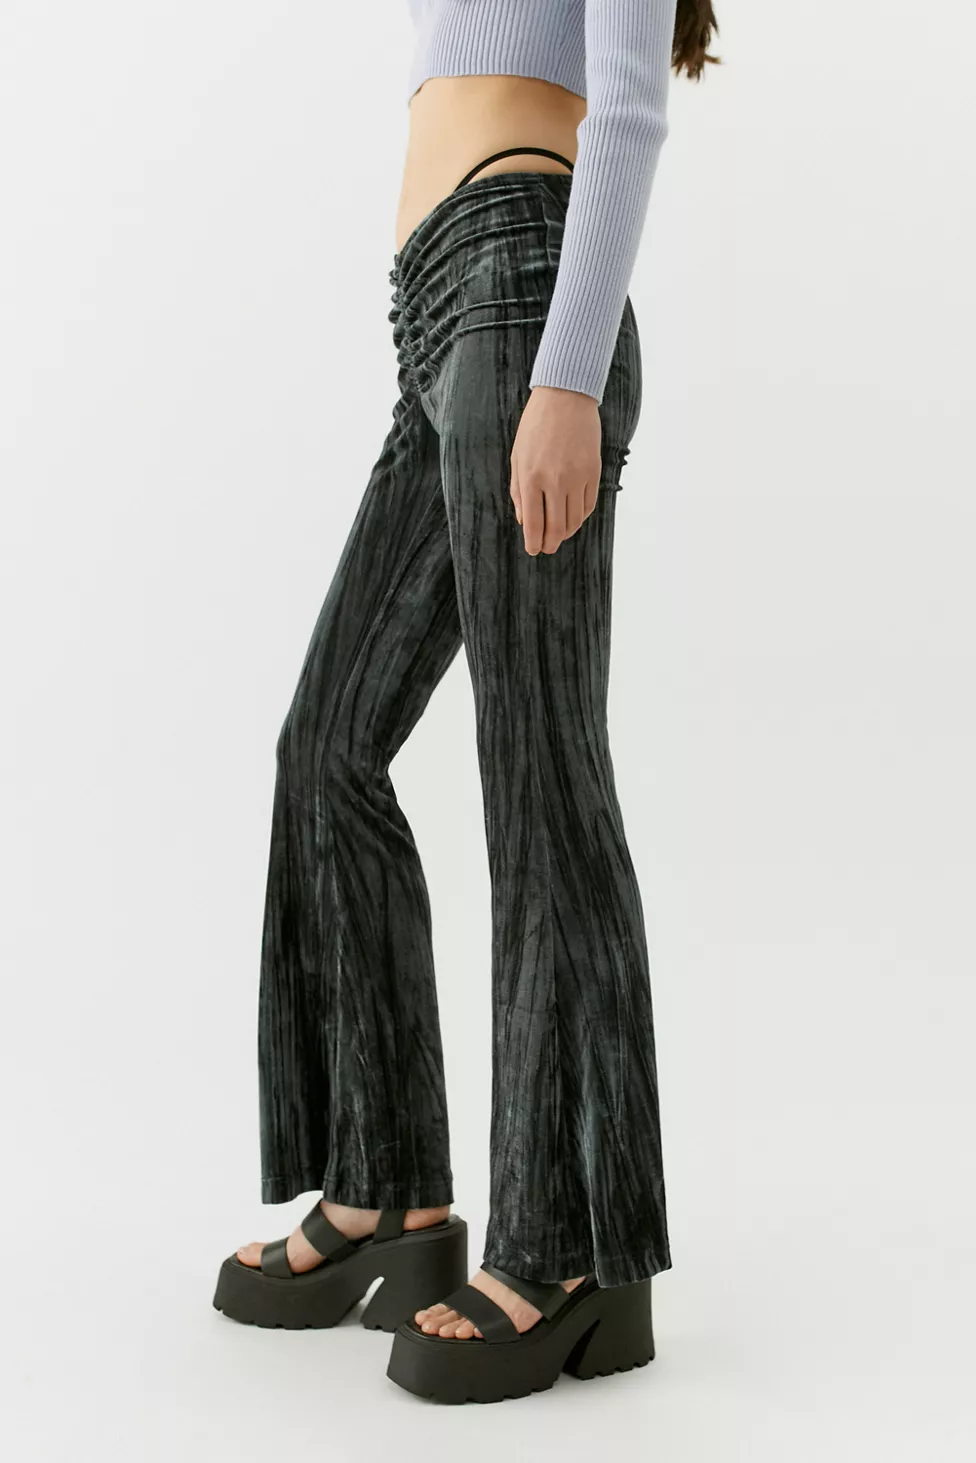 urban outfitters flared pants